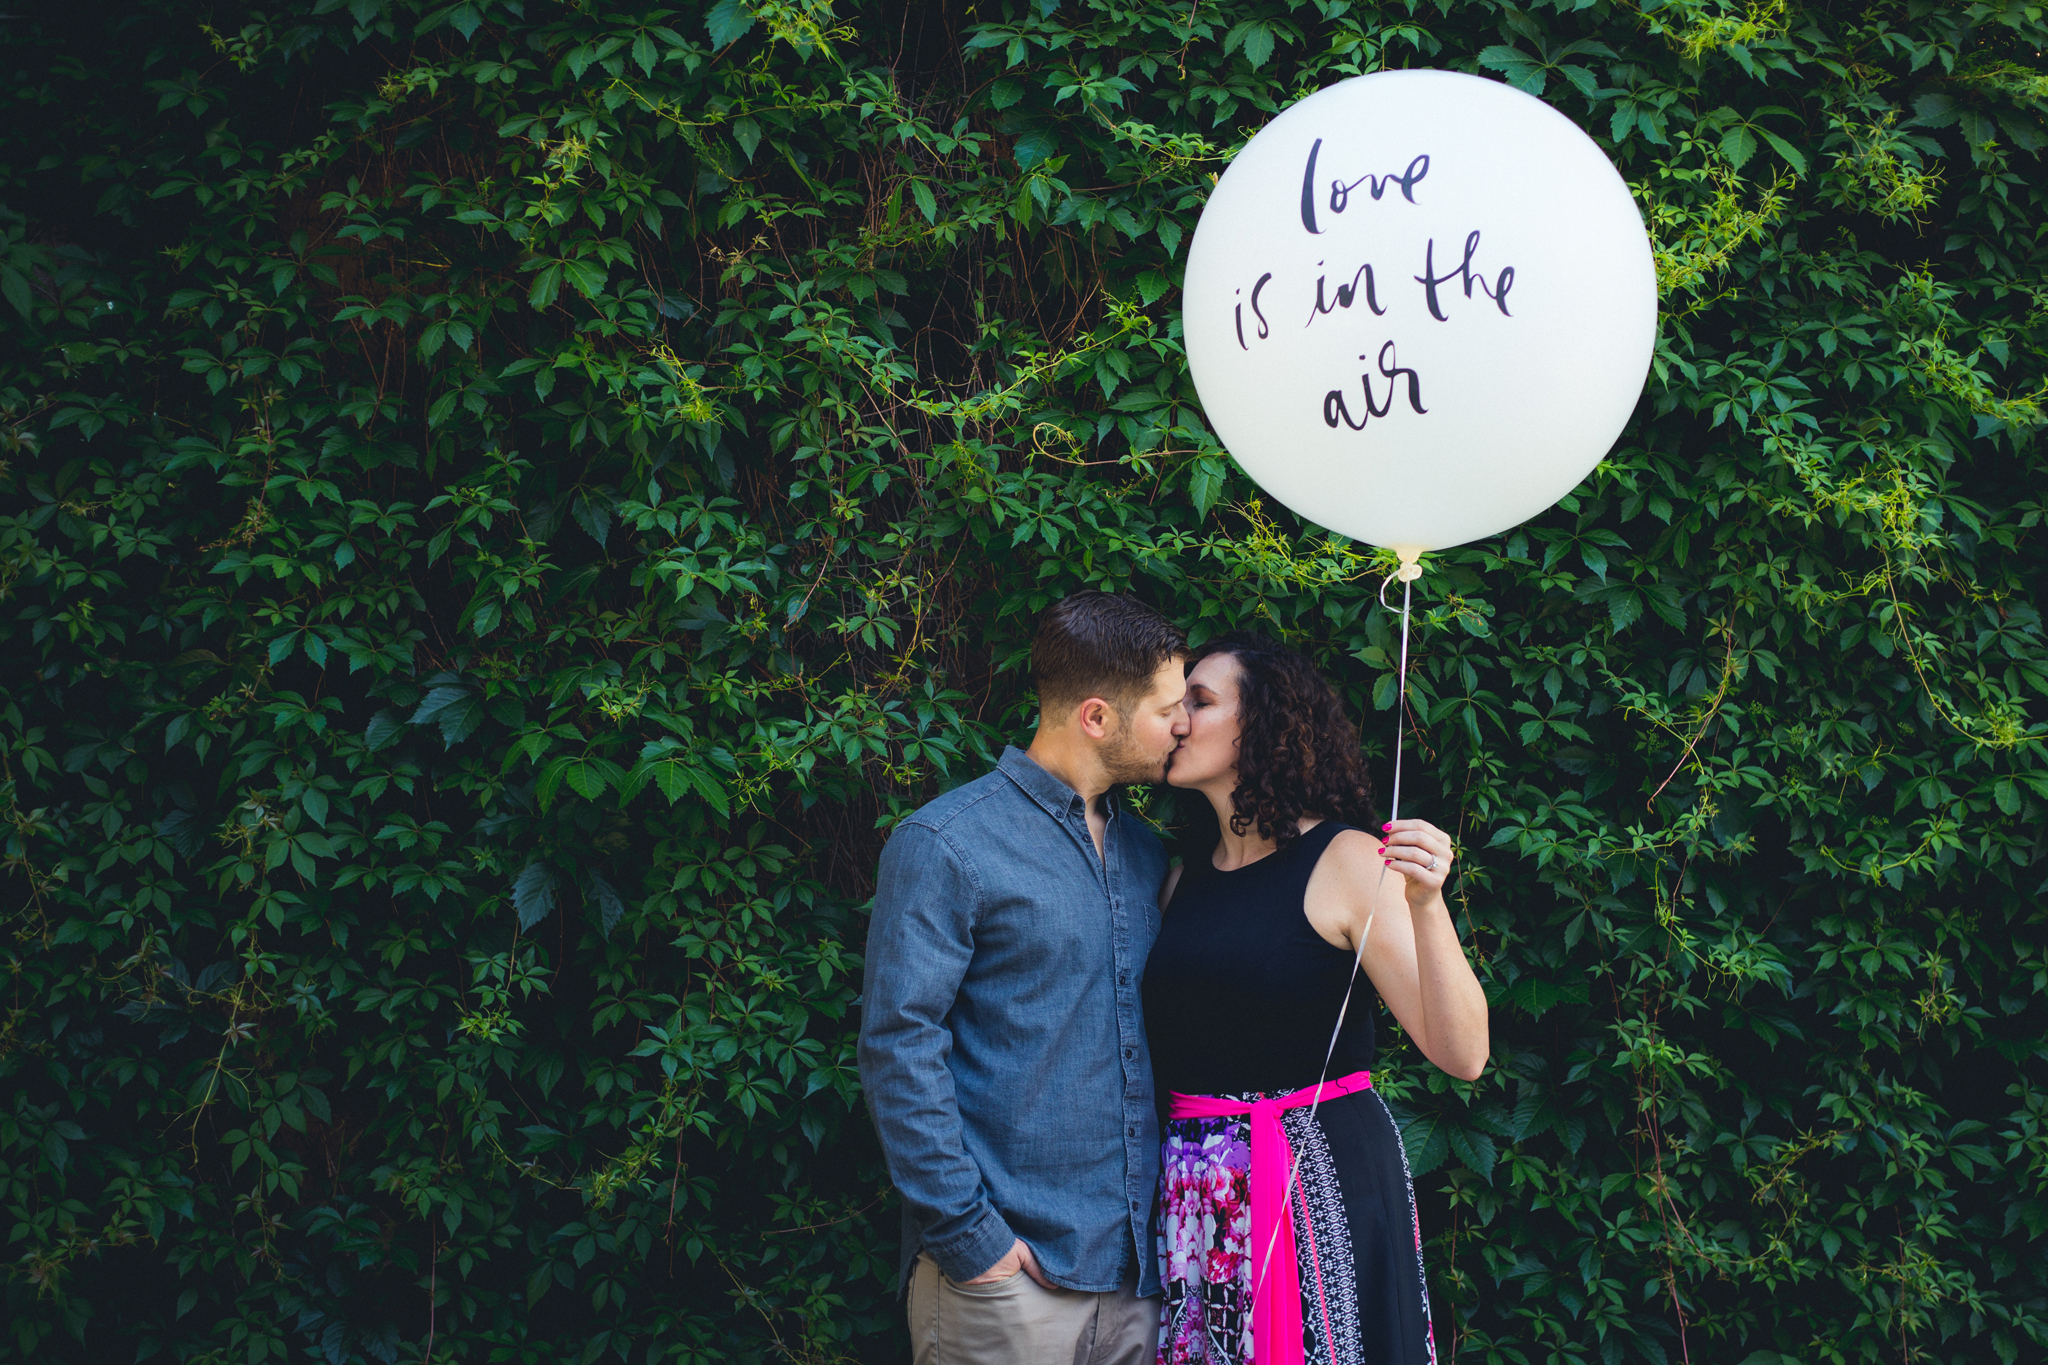 Kellie & Brian's Engagement Photography Session in Downtown Denver